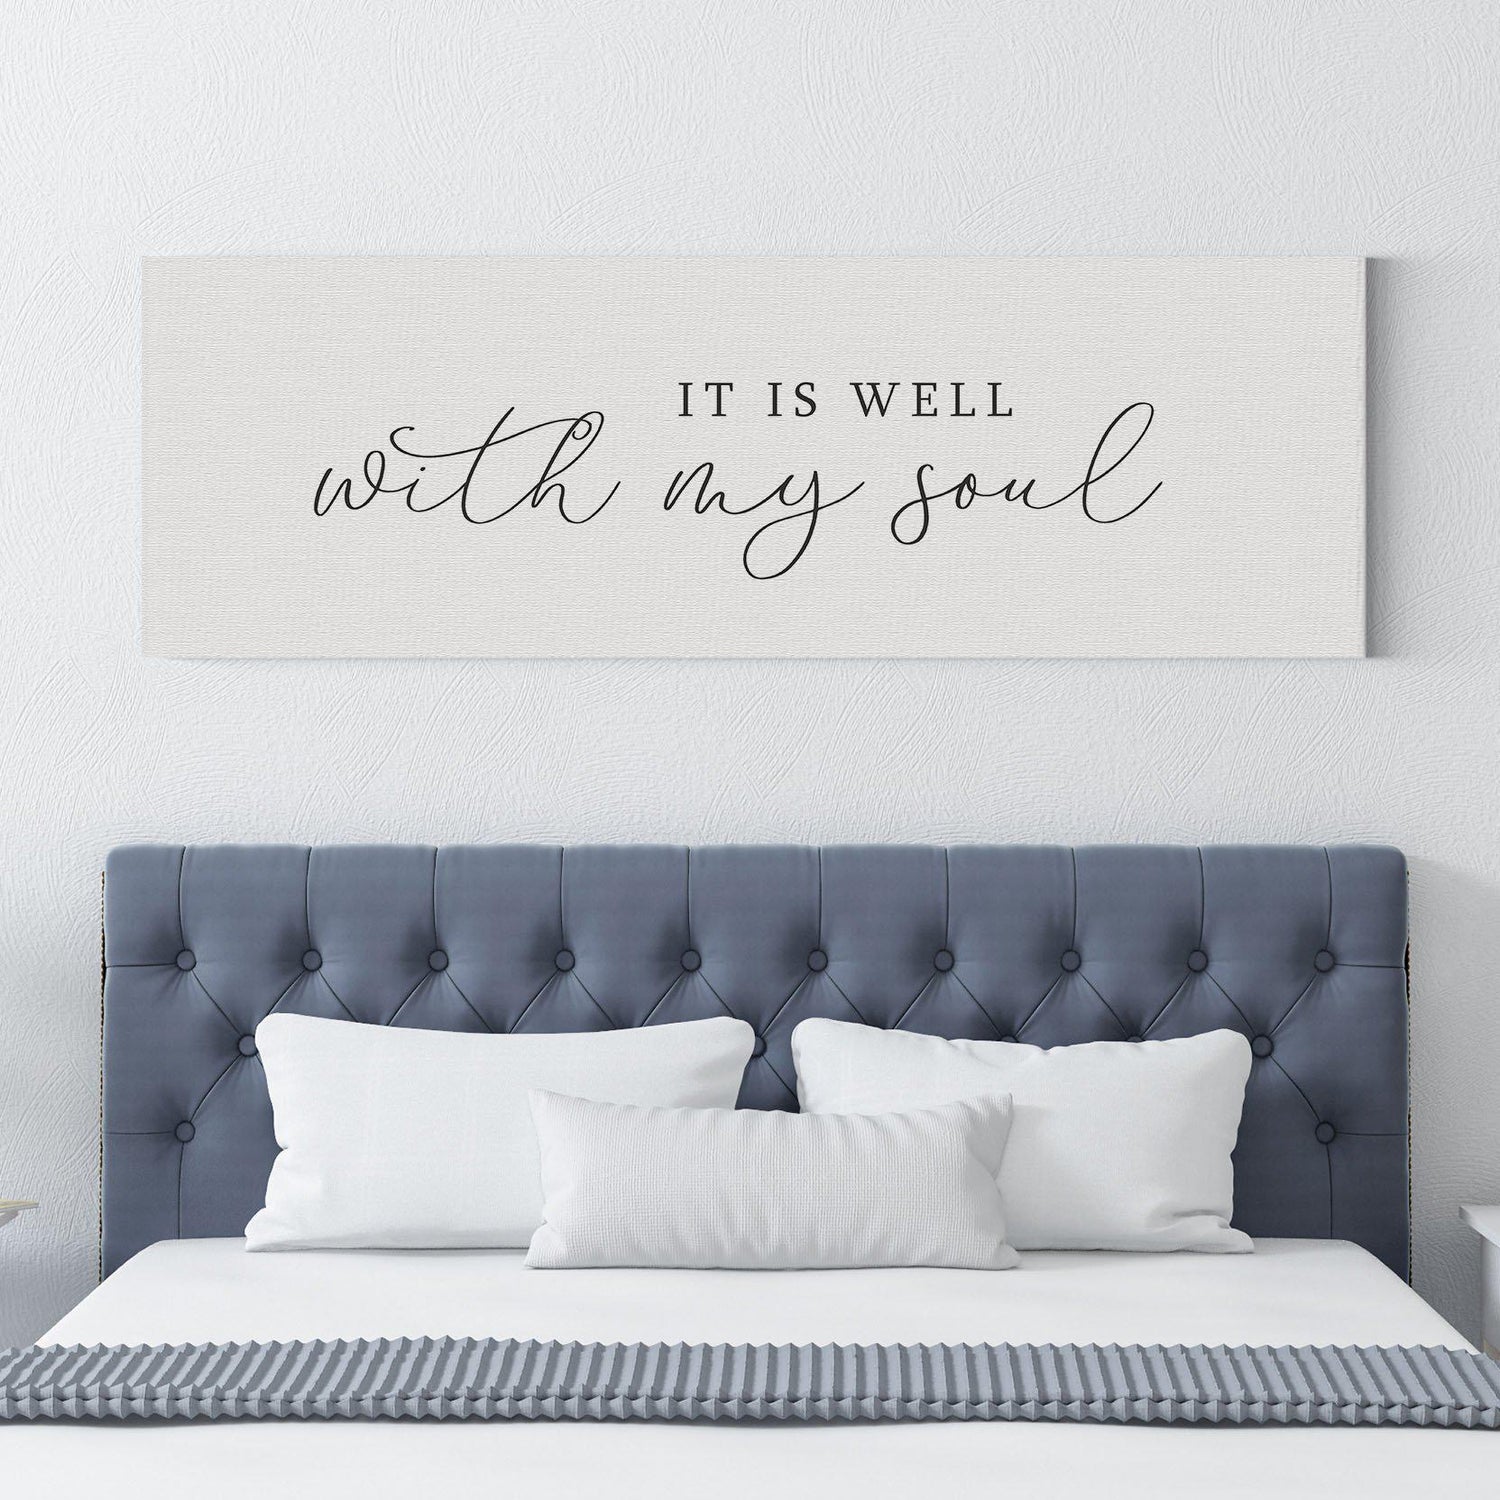 It is Well With My Soul | Inspirational Wall Art - Forever Written